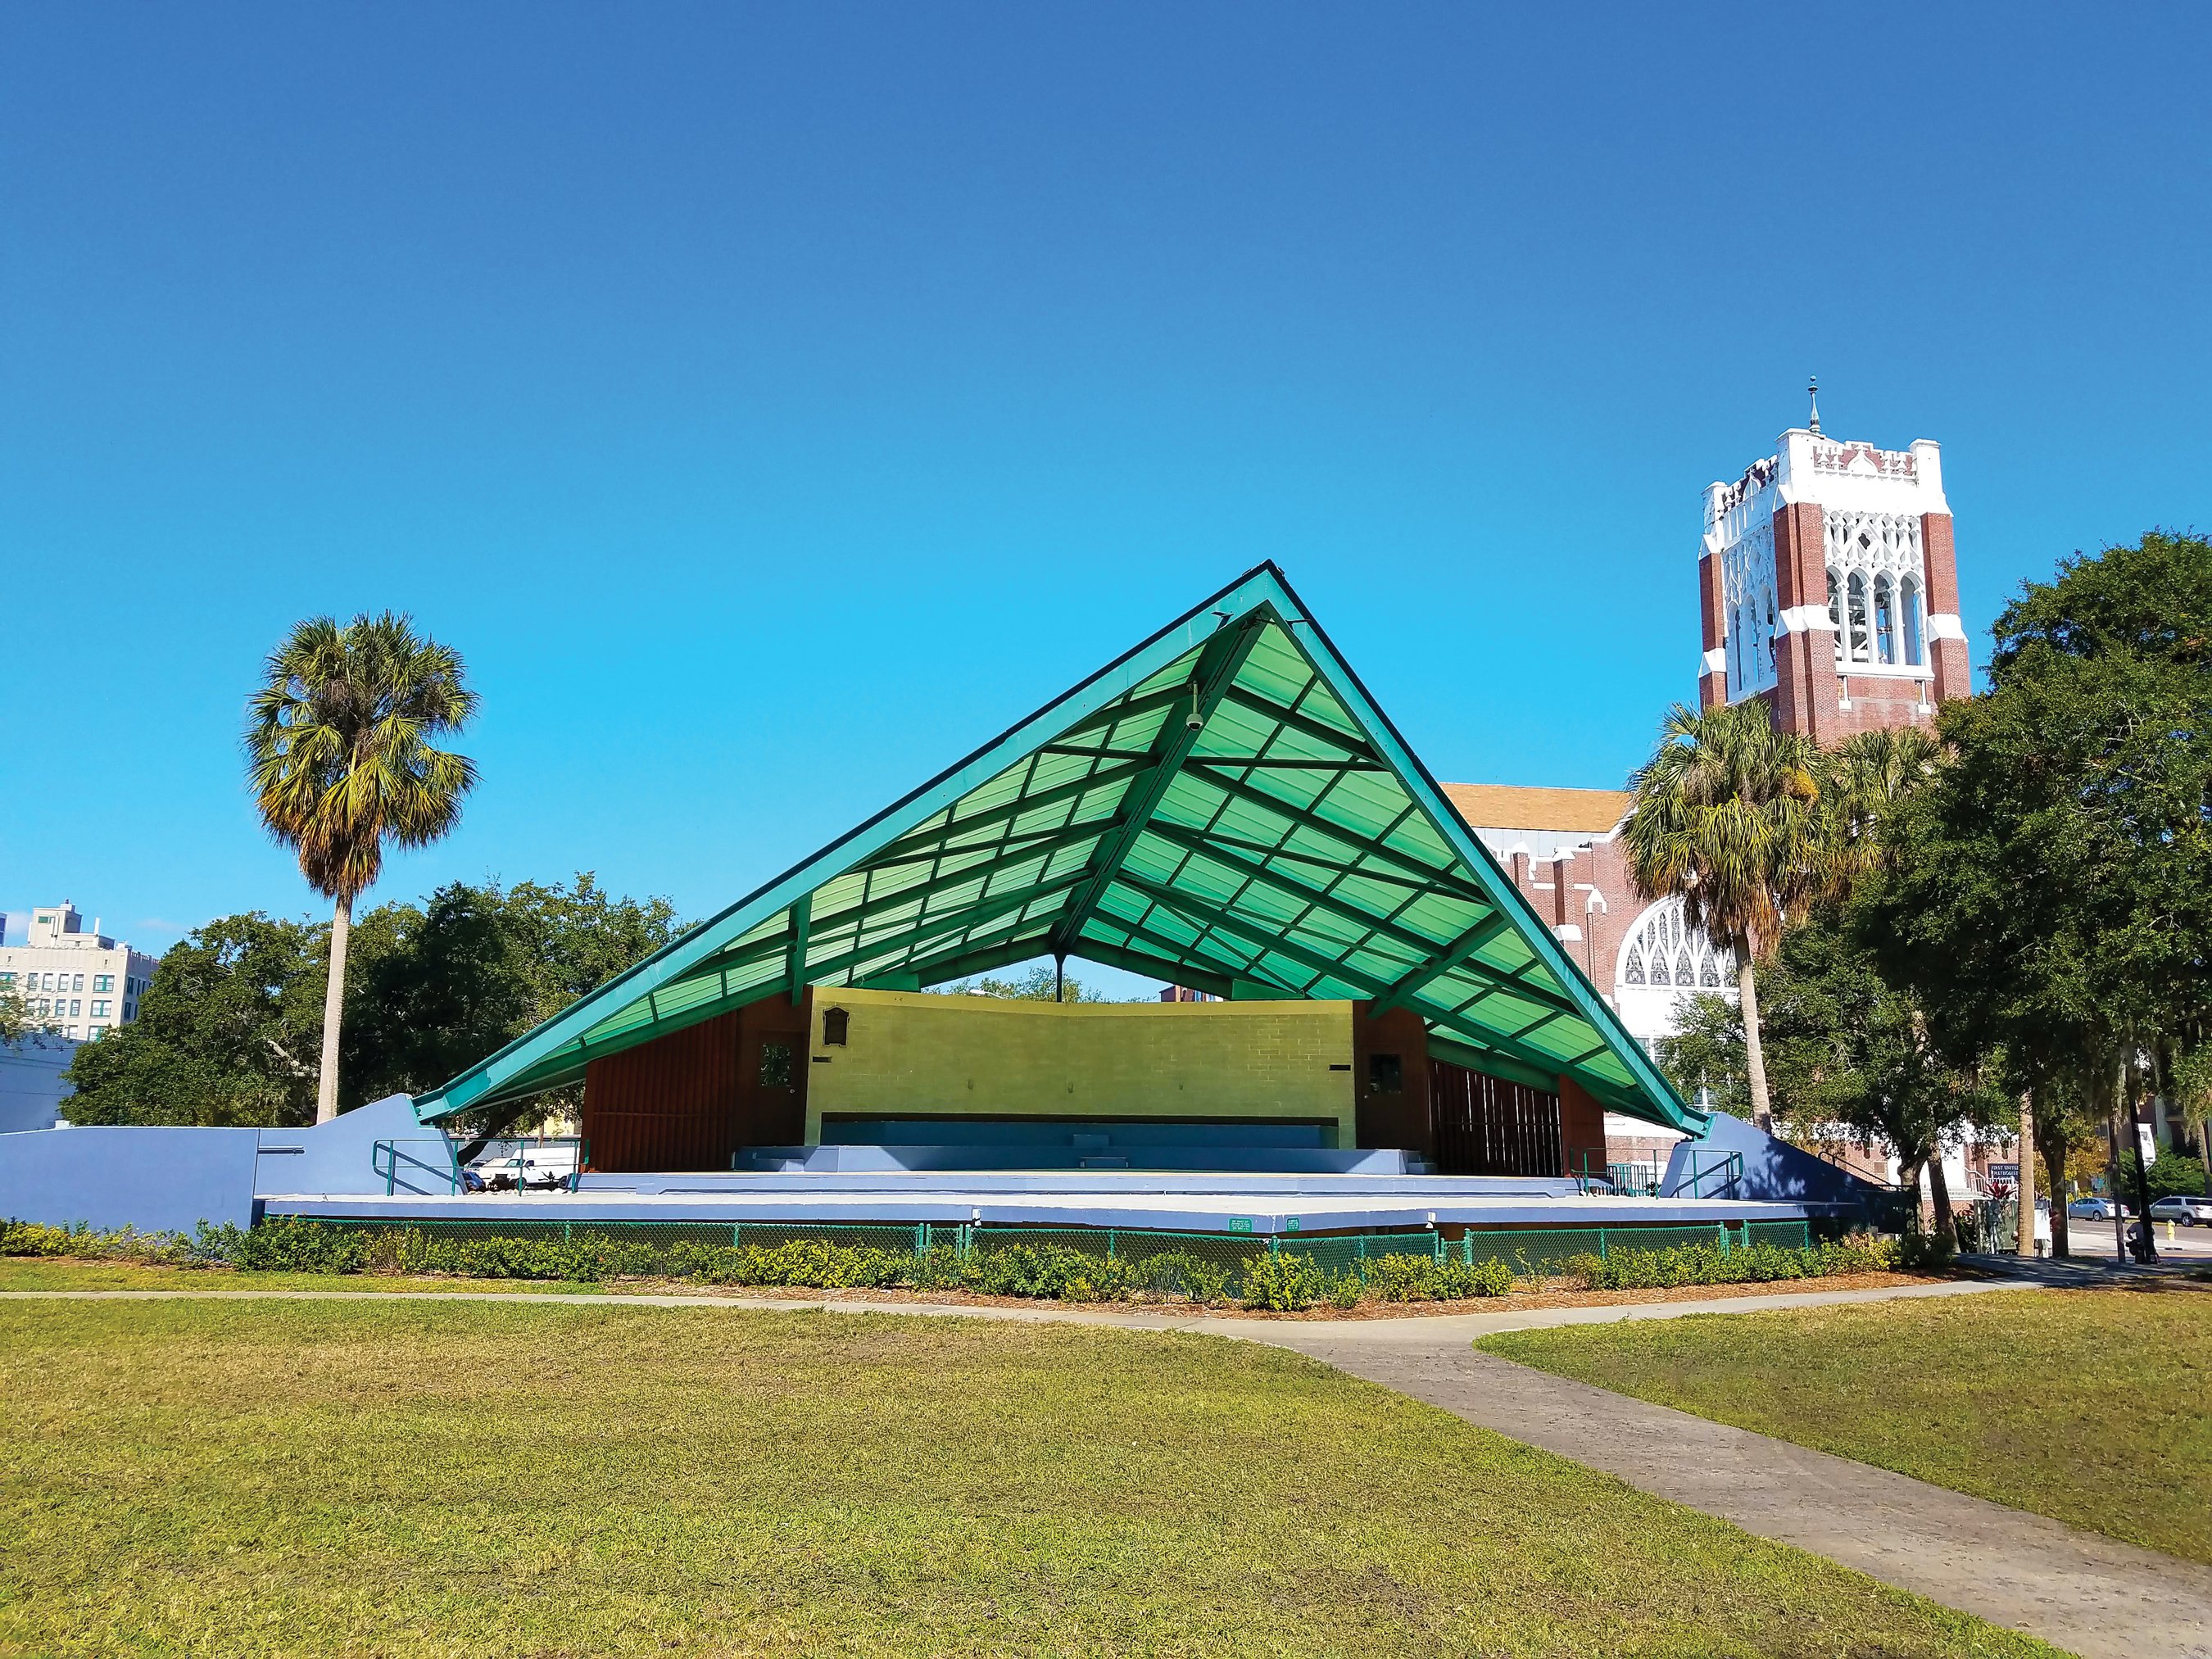 In 1954, modernist architect William Harvard won the American Institute of Architecture’s Award of Excellence for his design of the Williams Park band shell